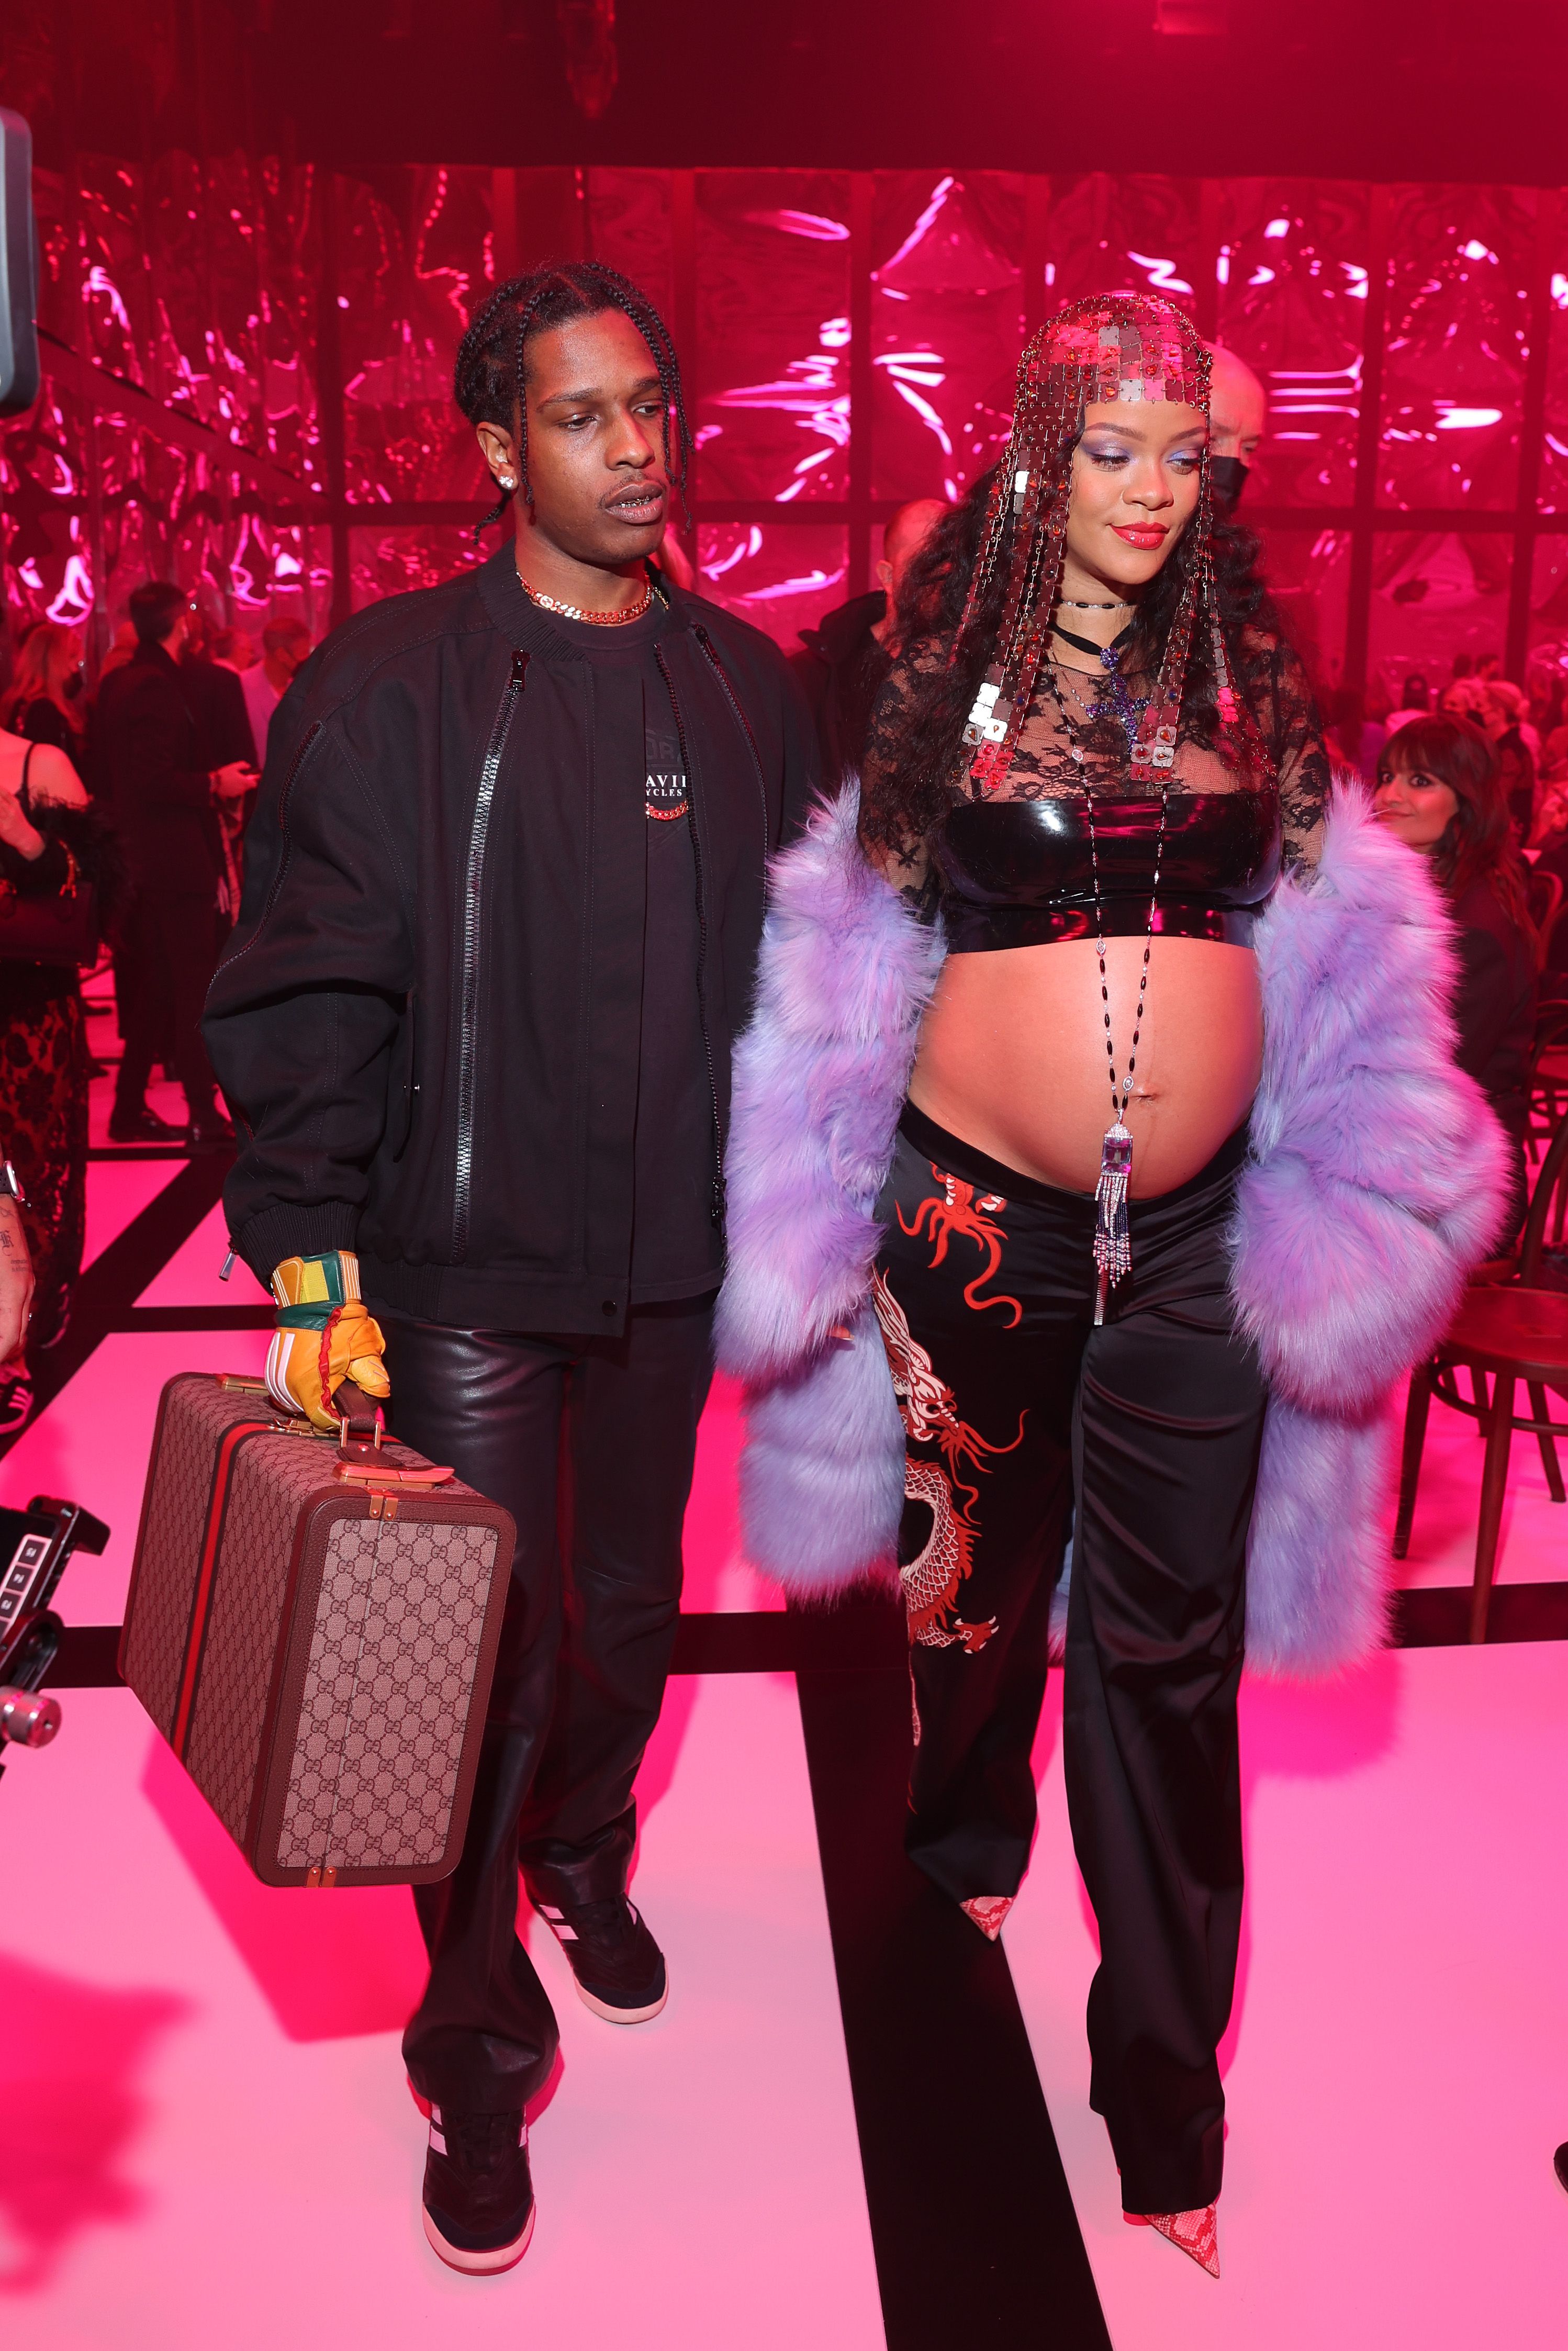 Savage X Fenty's Latest Maternity Capsule Collection Is on the Way